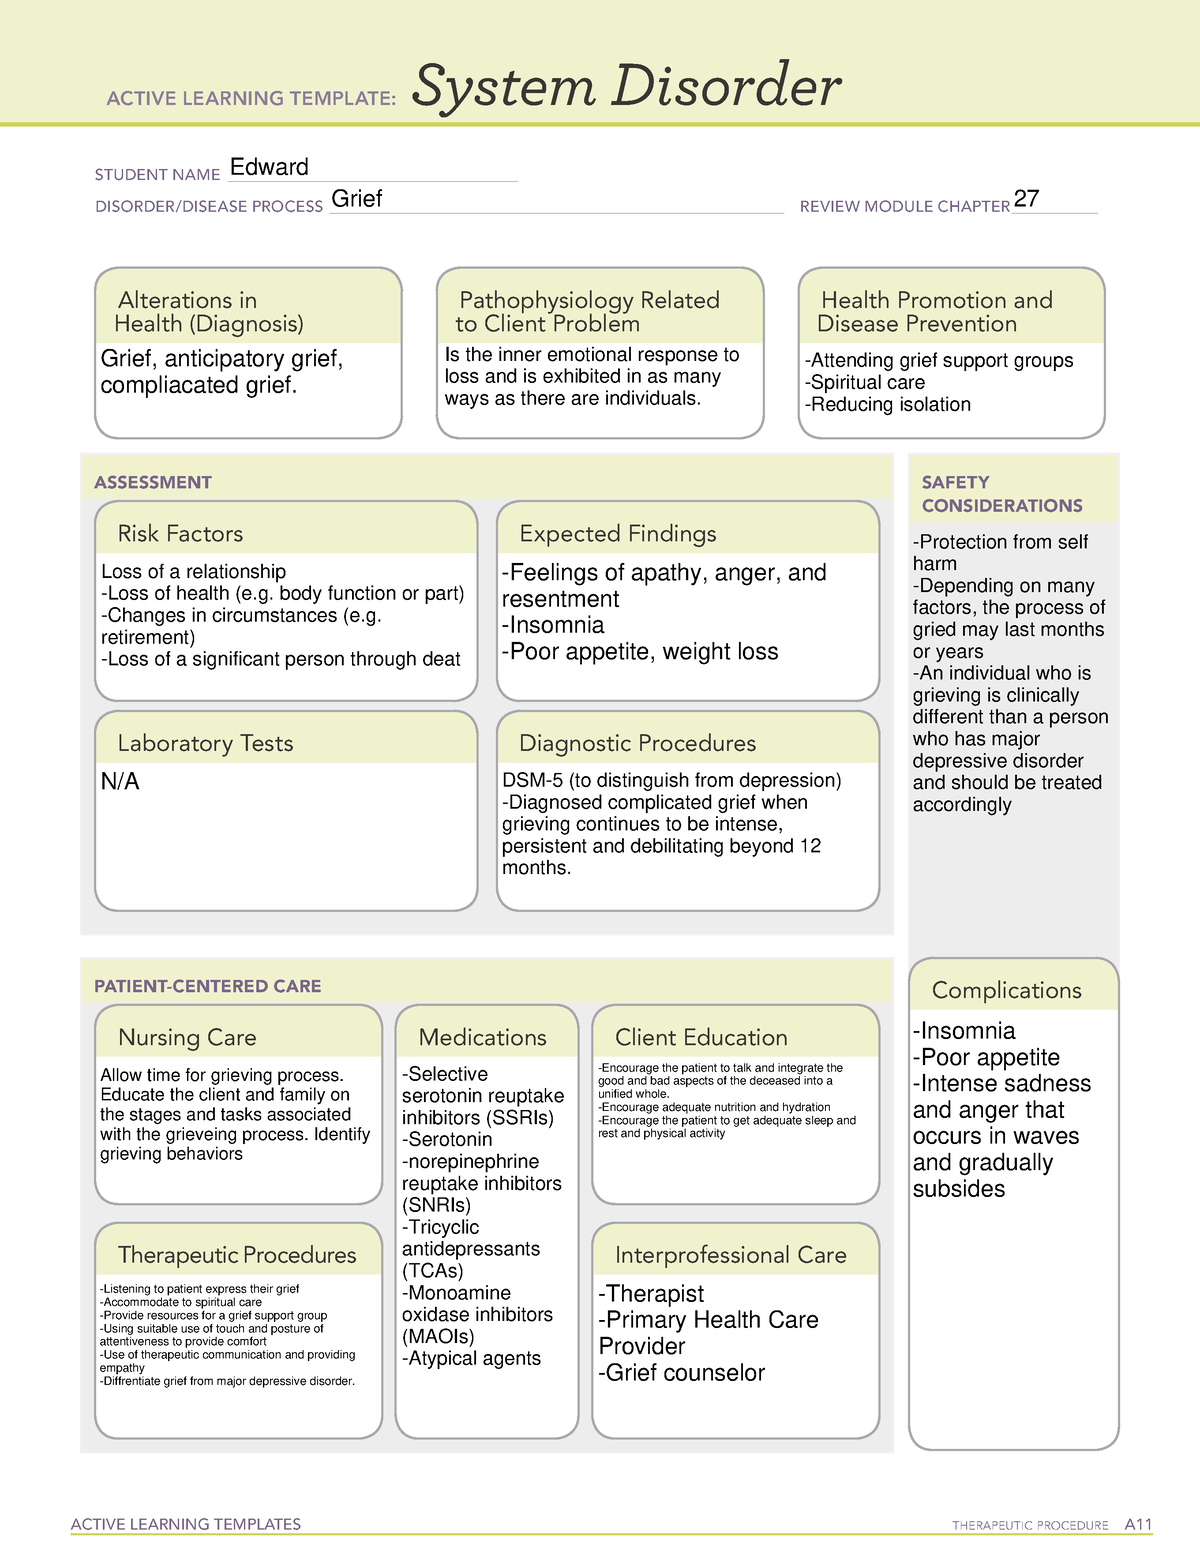 Active Learning Template Grief ACTIVE LEARNING TEMPLATES